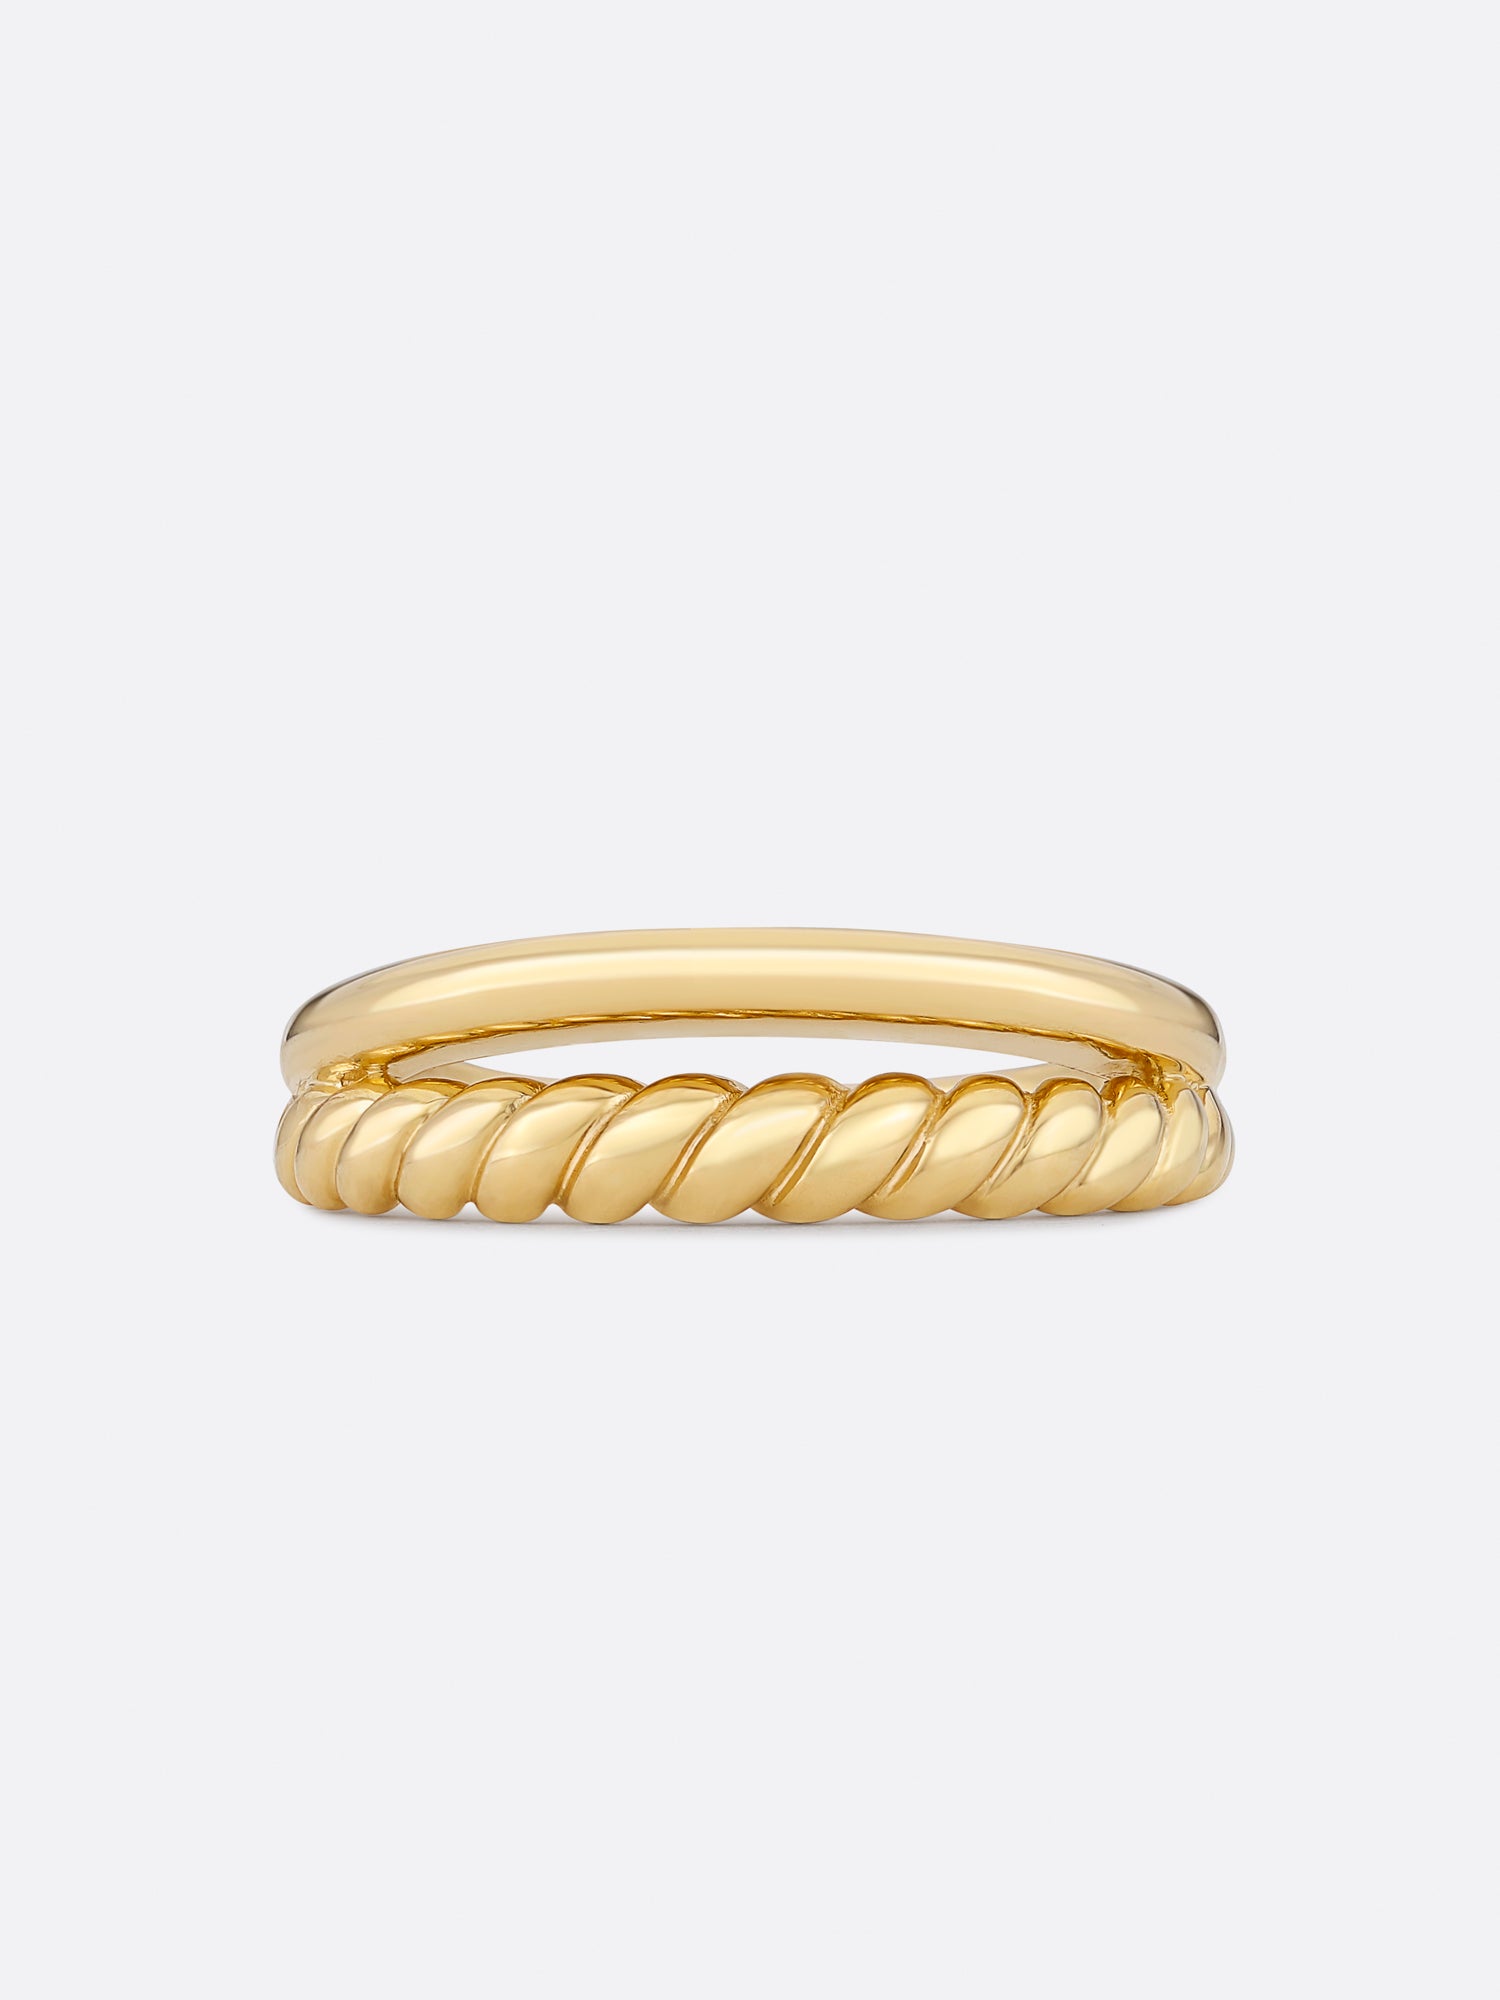 18k Yellow gold duo band ring front view